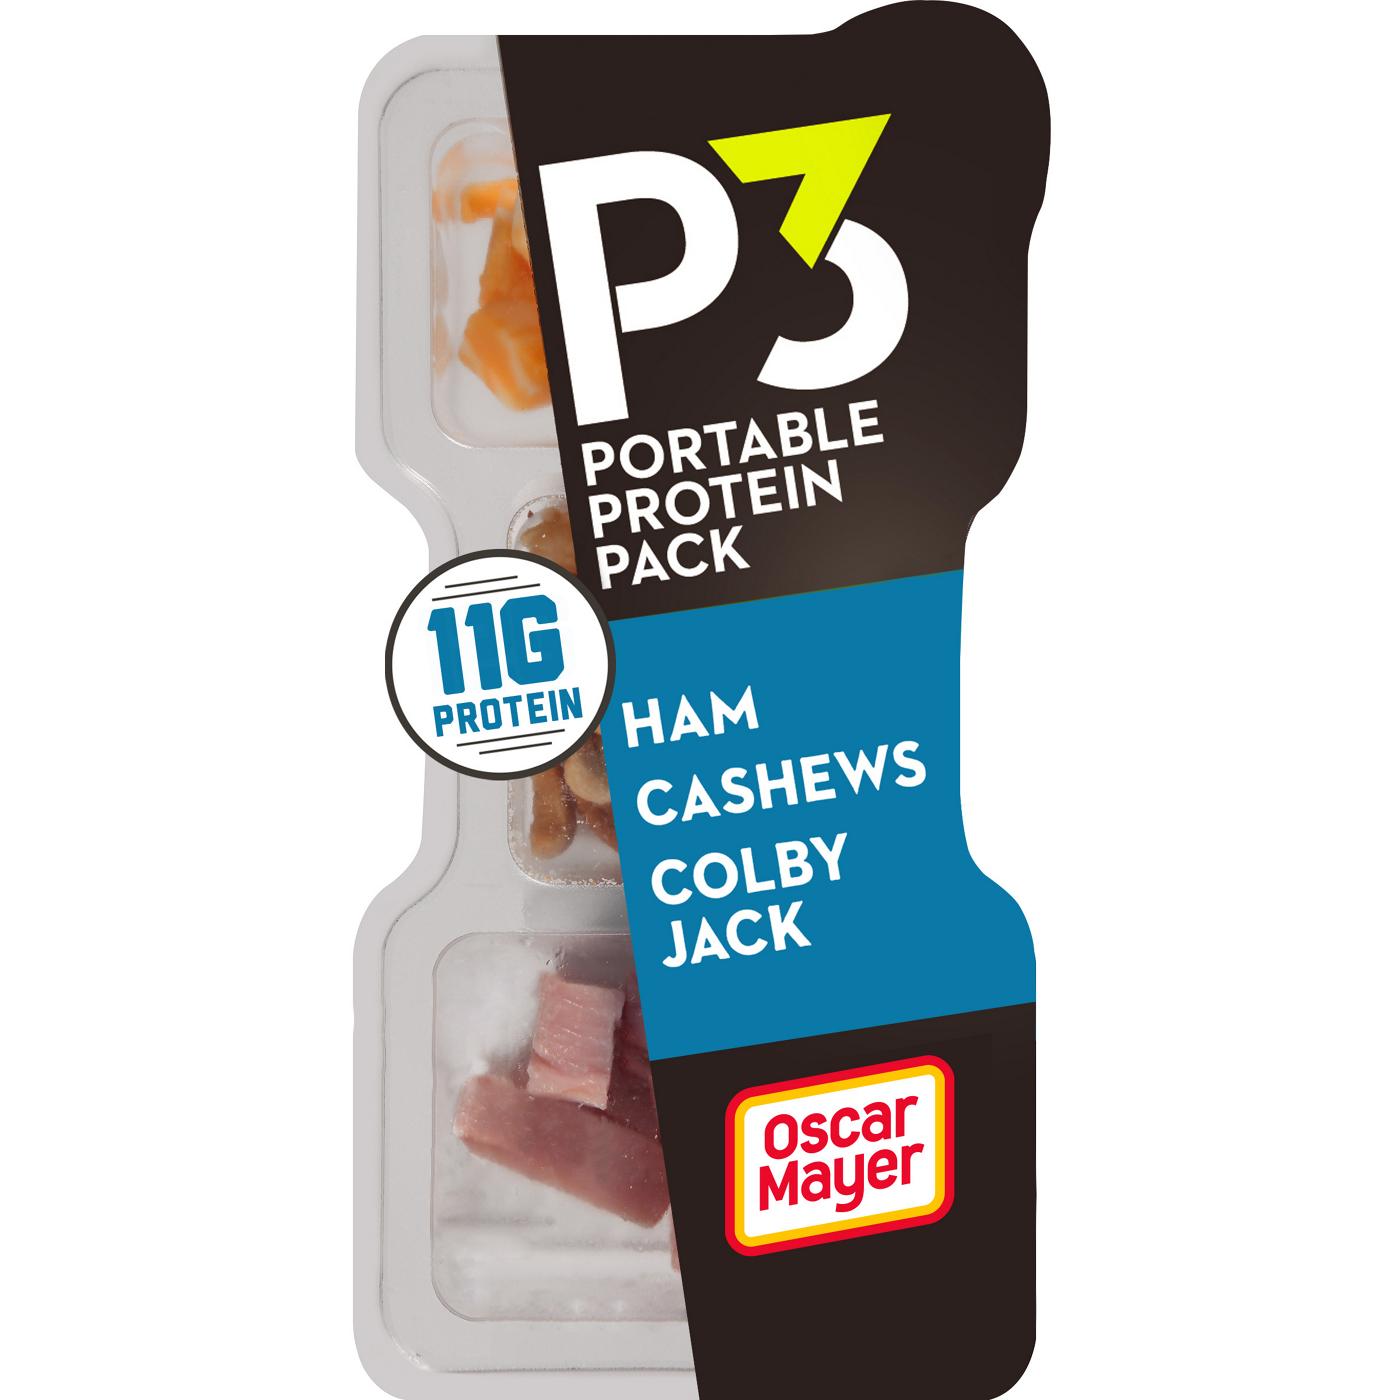 P3 Portable Protein Pack Snack Tray - Ham, Cashews & Colby Jack; image 1 of 2